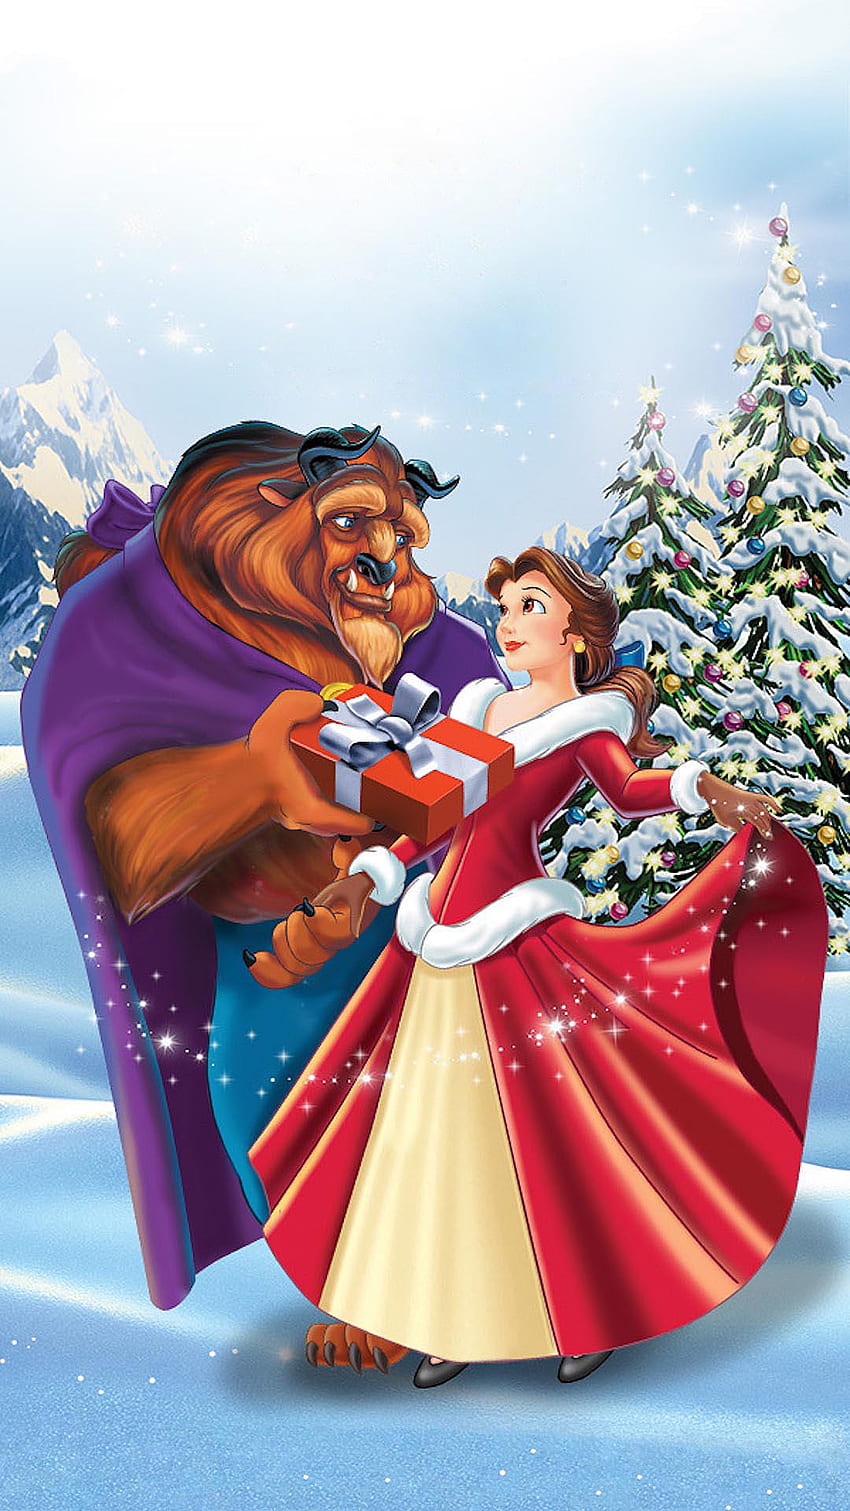 Beauty and the Beast iphone 5 wallpaper  Disney beauty and the beast  Disney Beauty and the beast